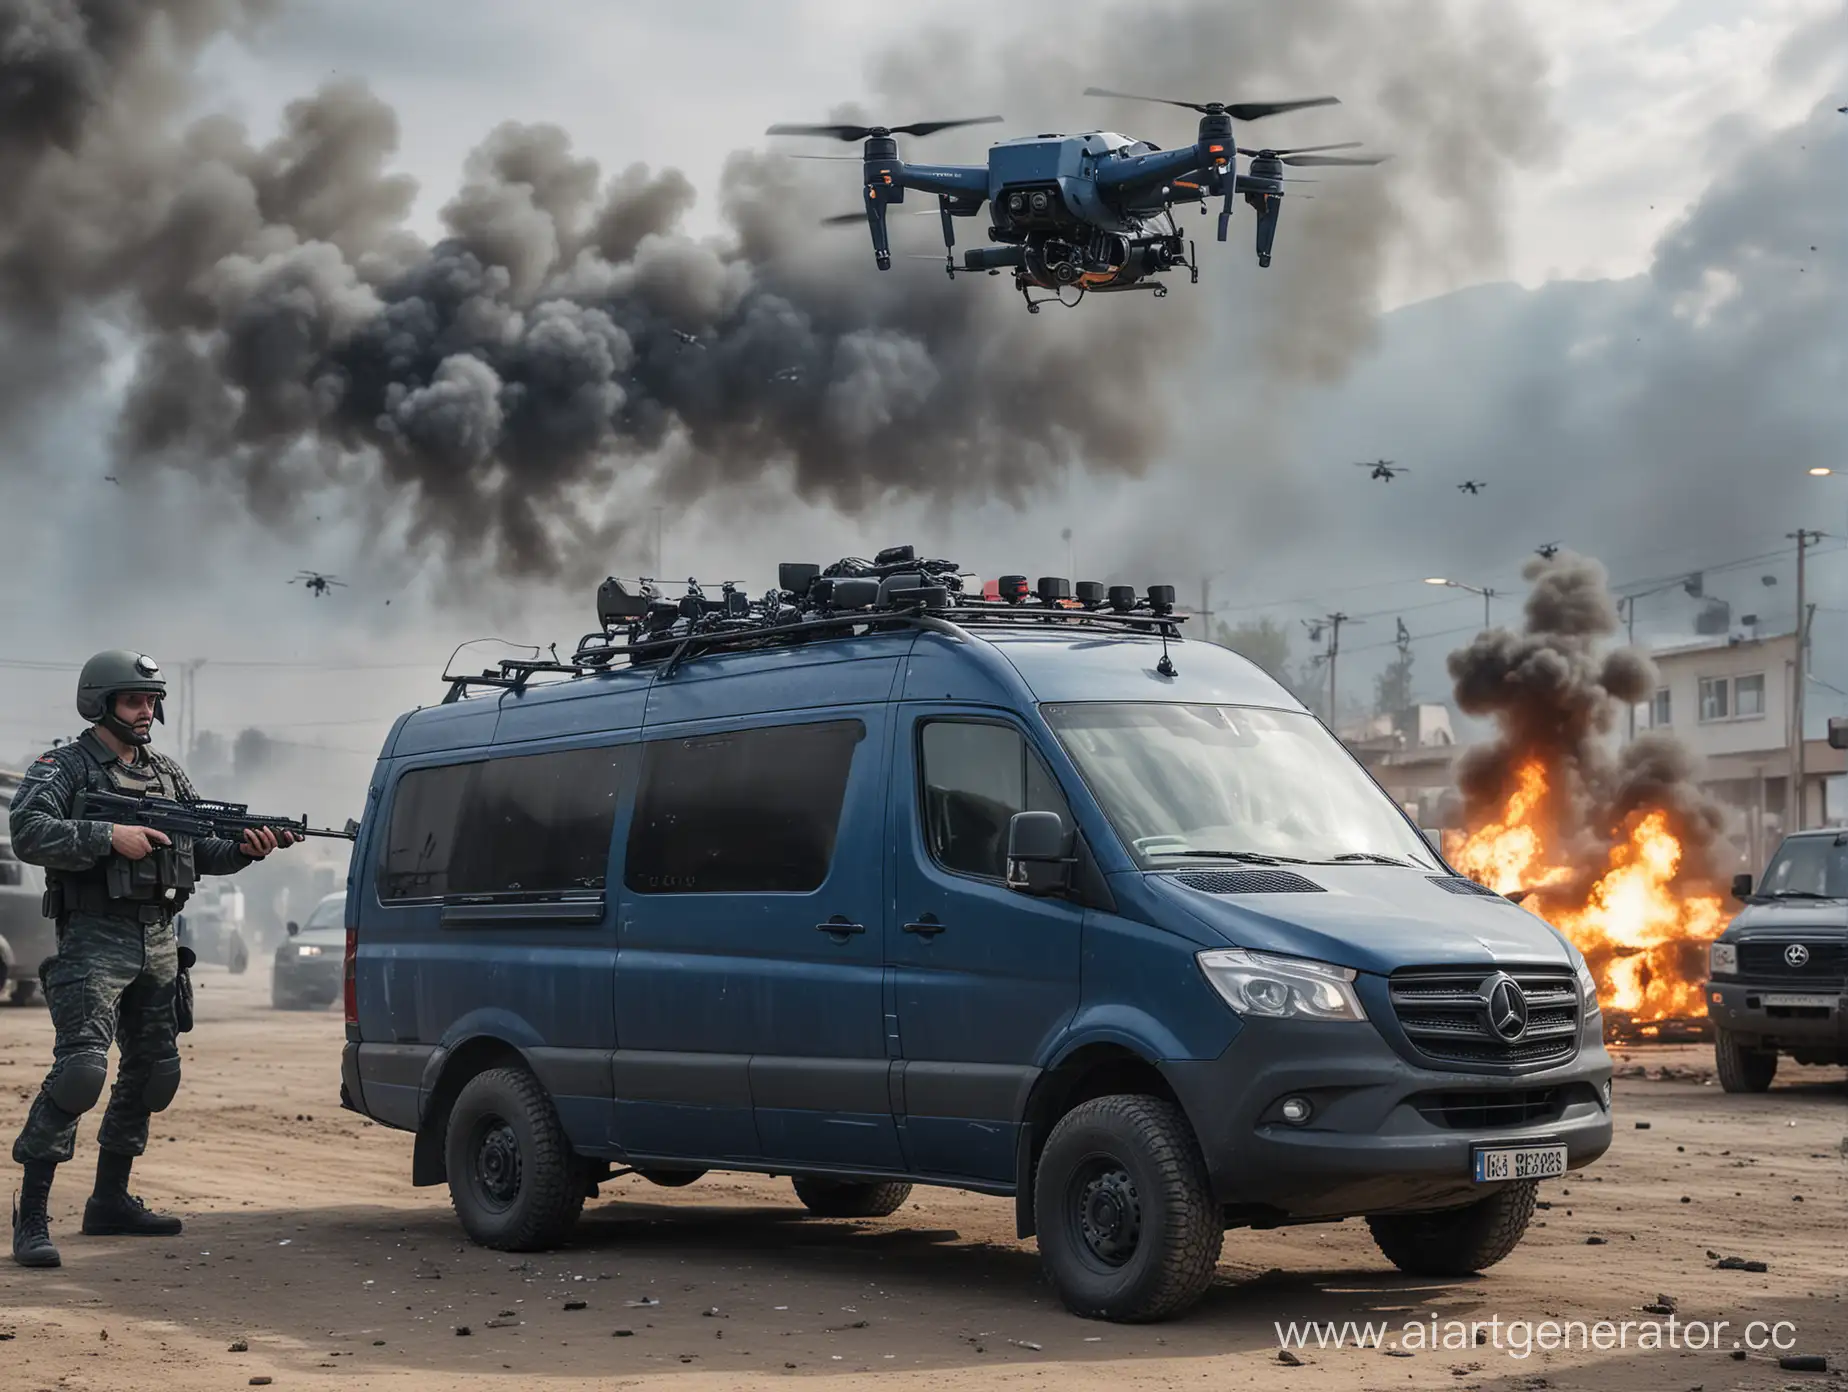 military officer stands with a blaster in front of the car, in the background flying quadrocopters and explode, in the background car mersedes sprinter dark blue color, the car has antennas